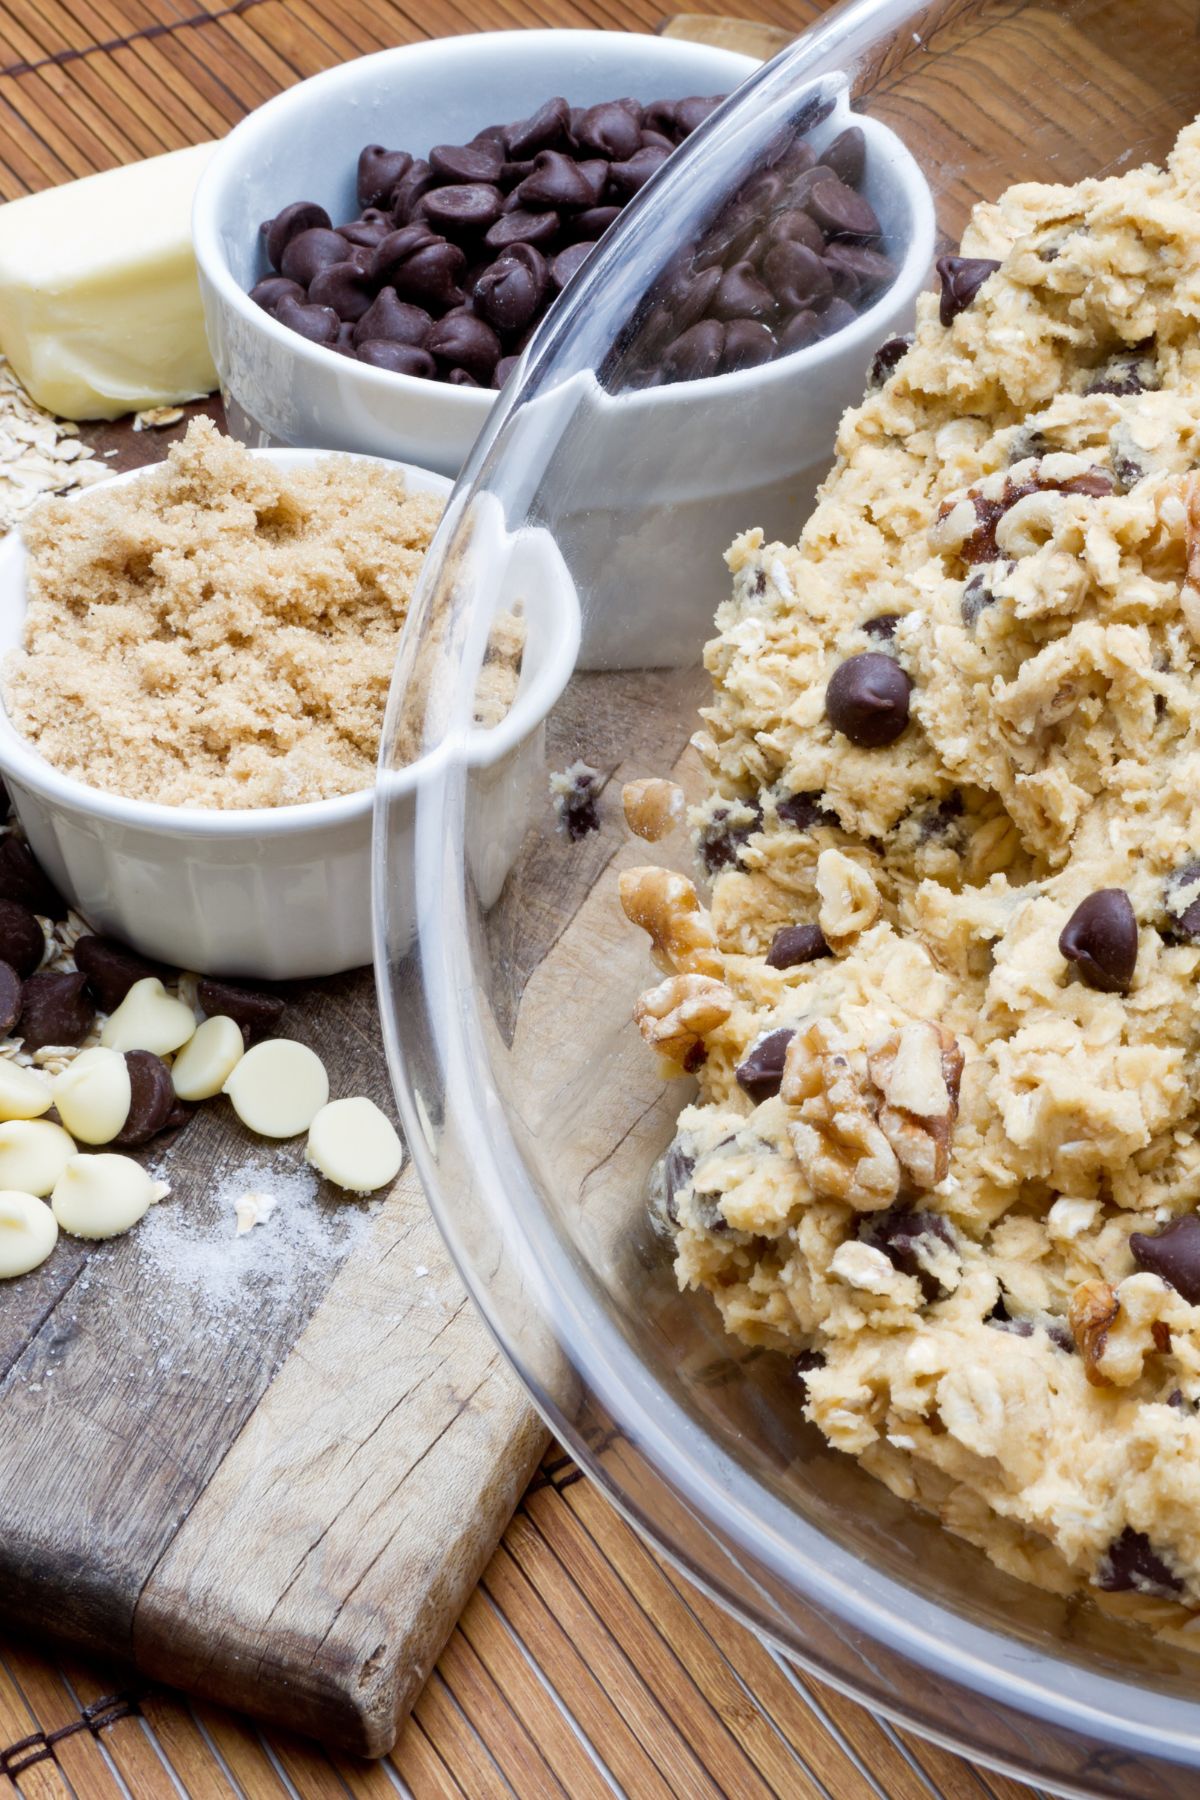 Bowl of chocolate chip cookie dough next to ingredients.